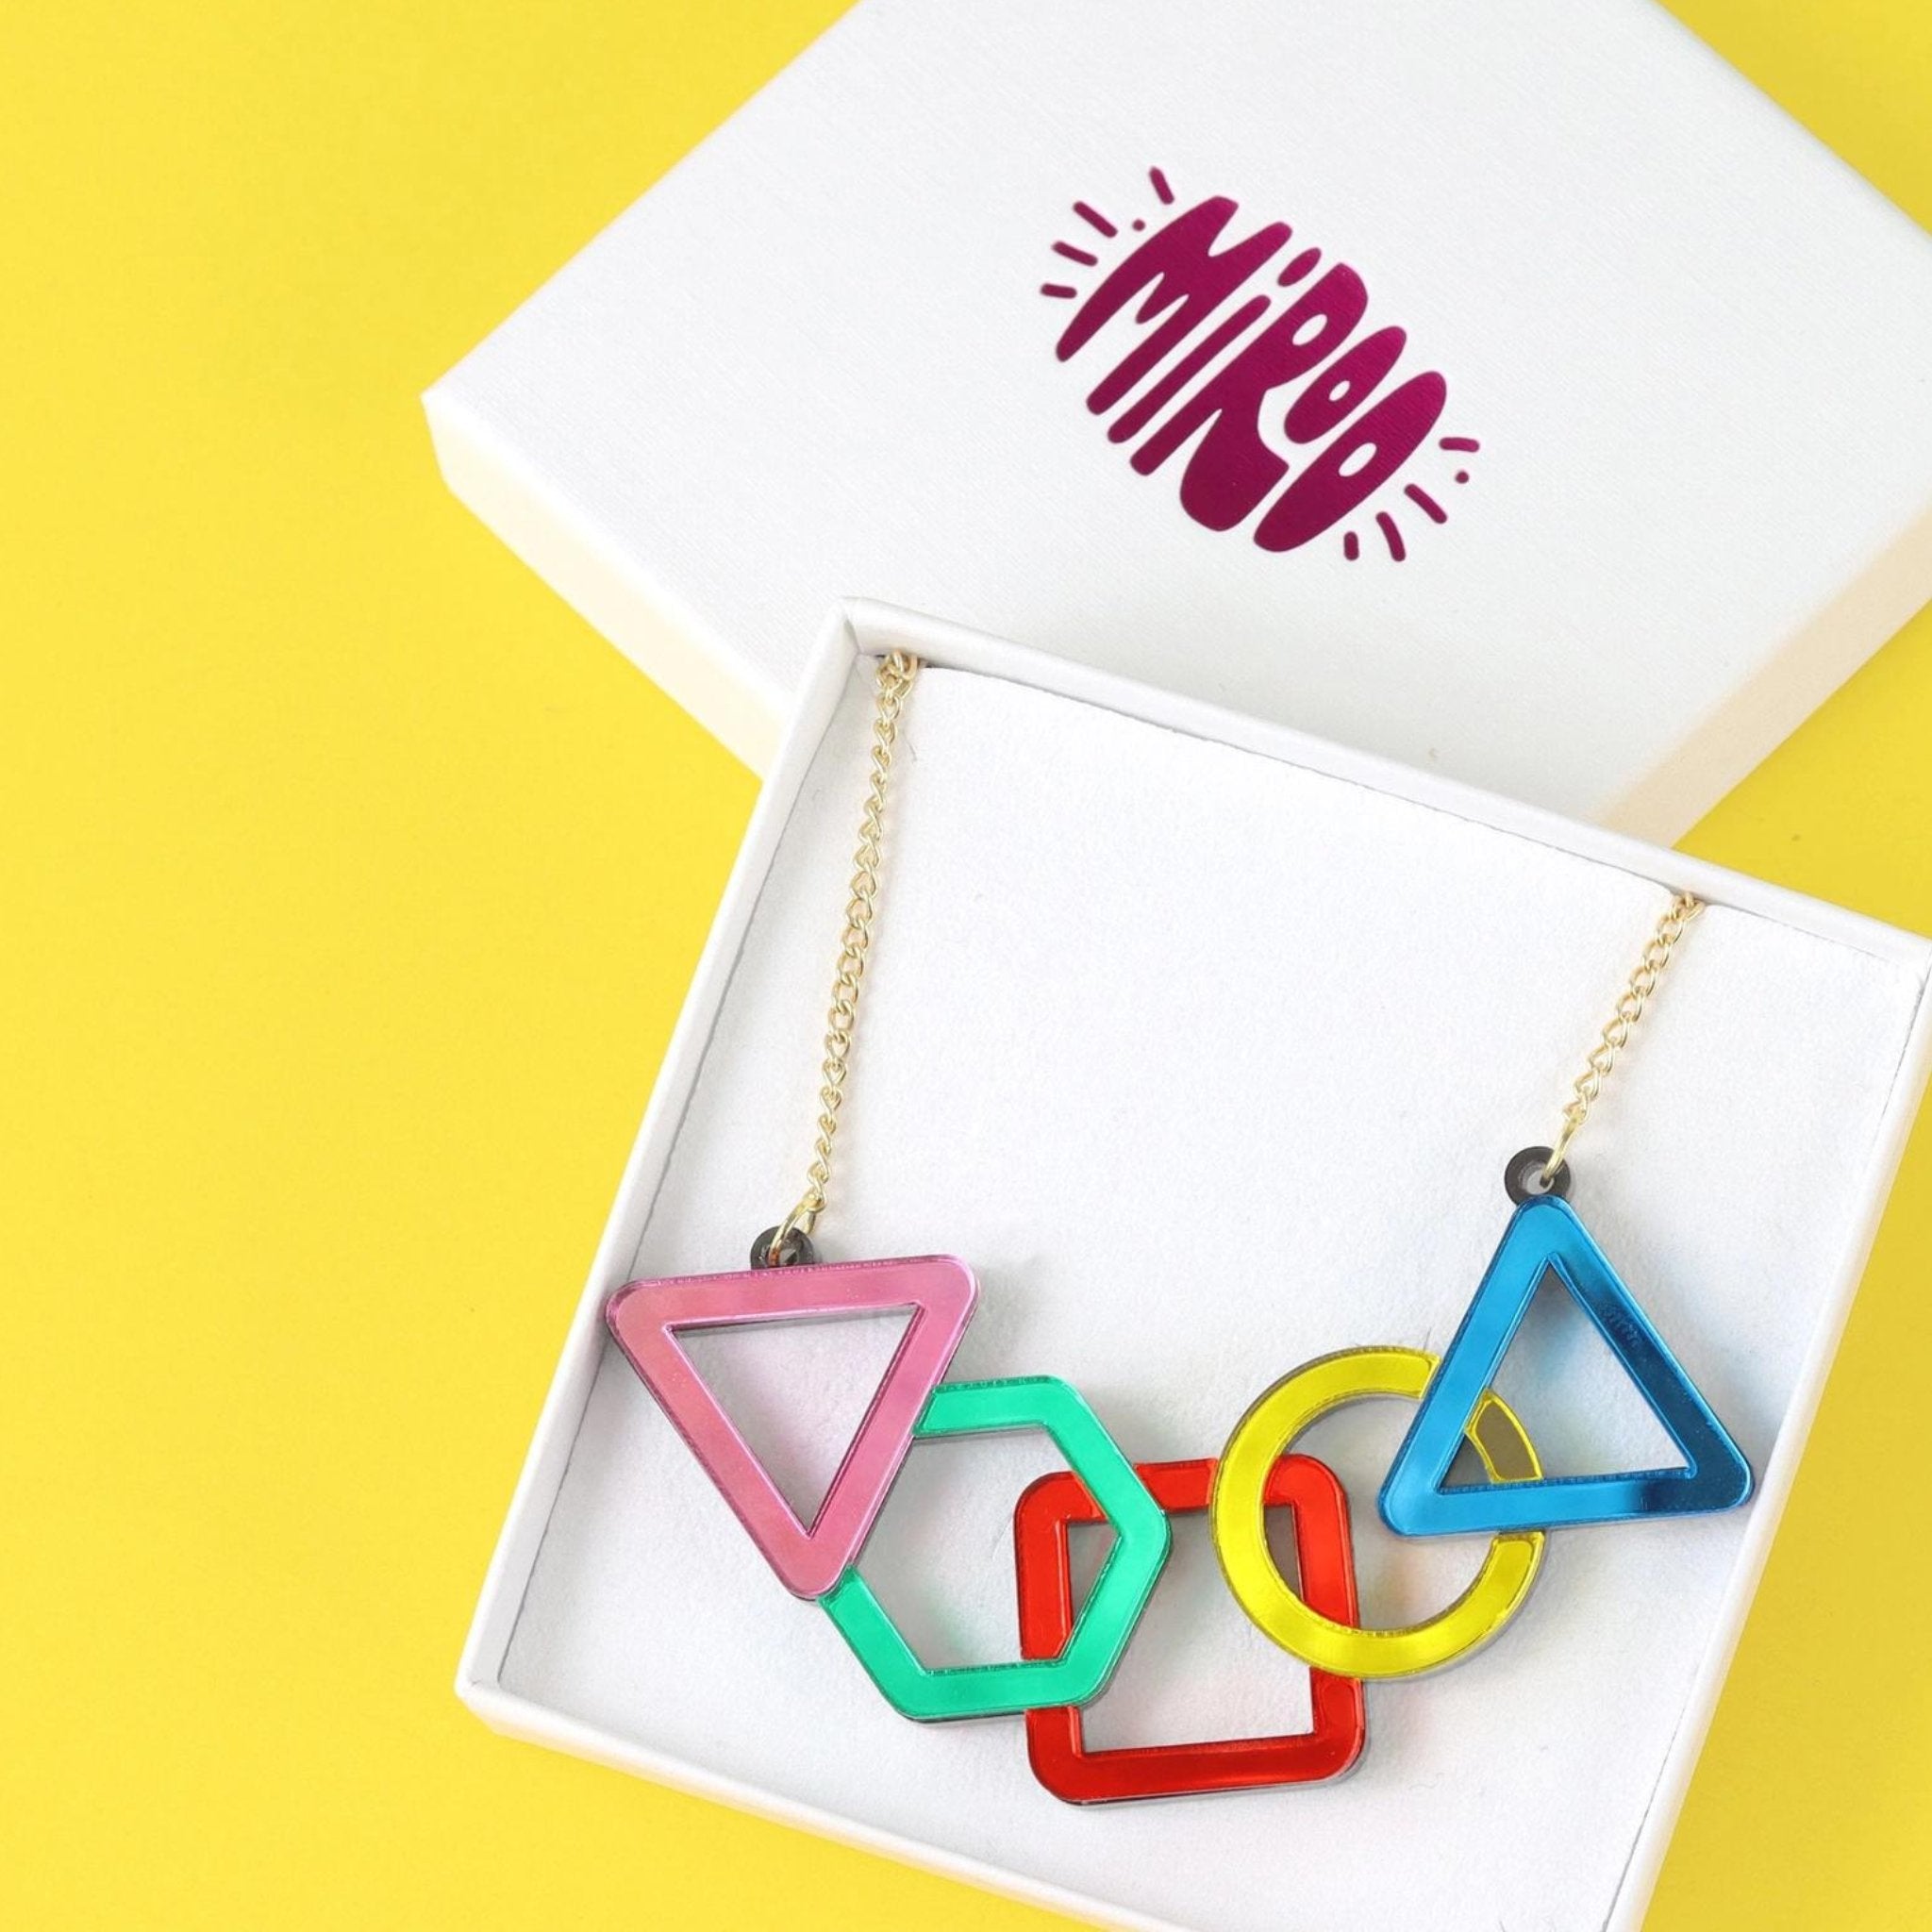 Colourful Mirror Shapes Necklace